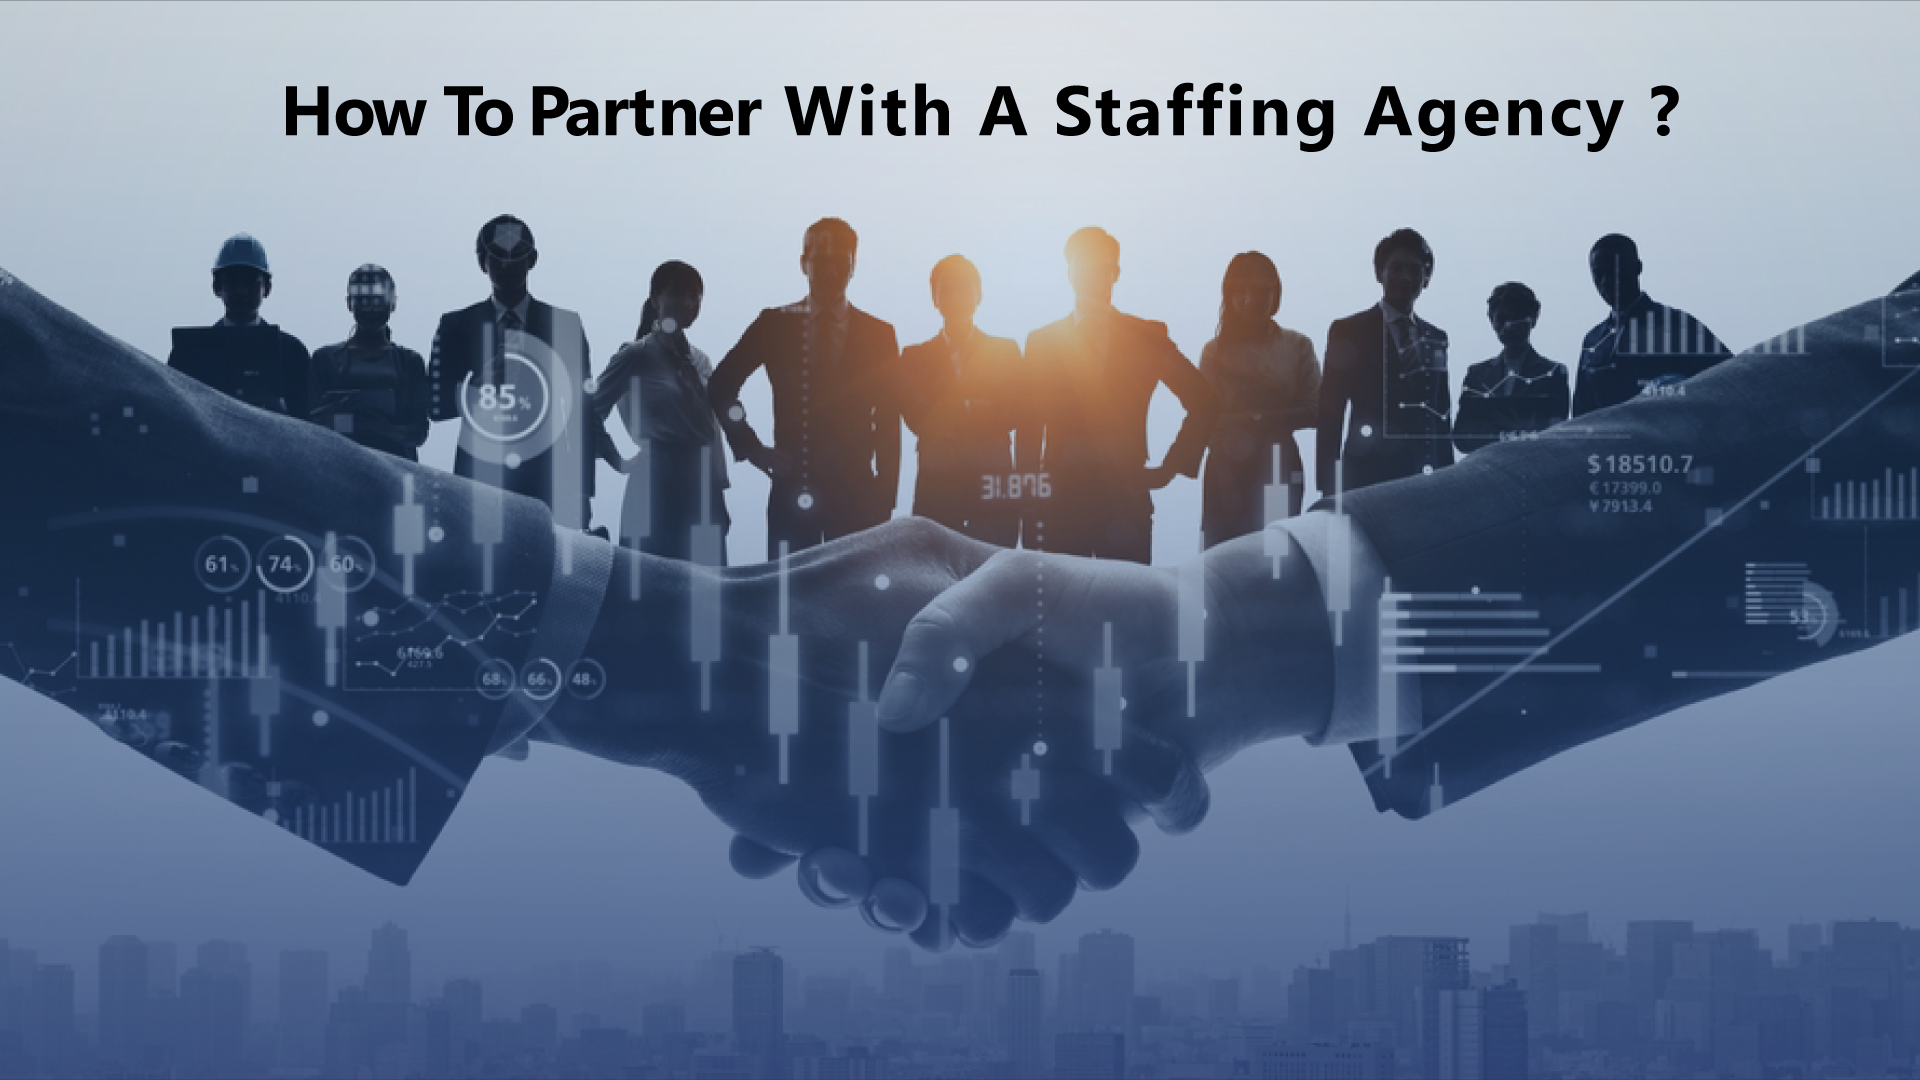 How To Partner With A Staffing Agency?